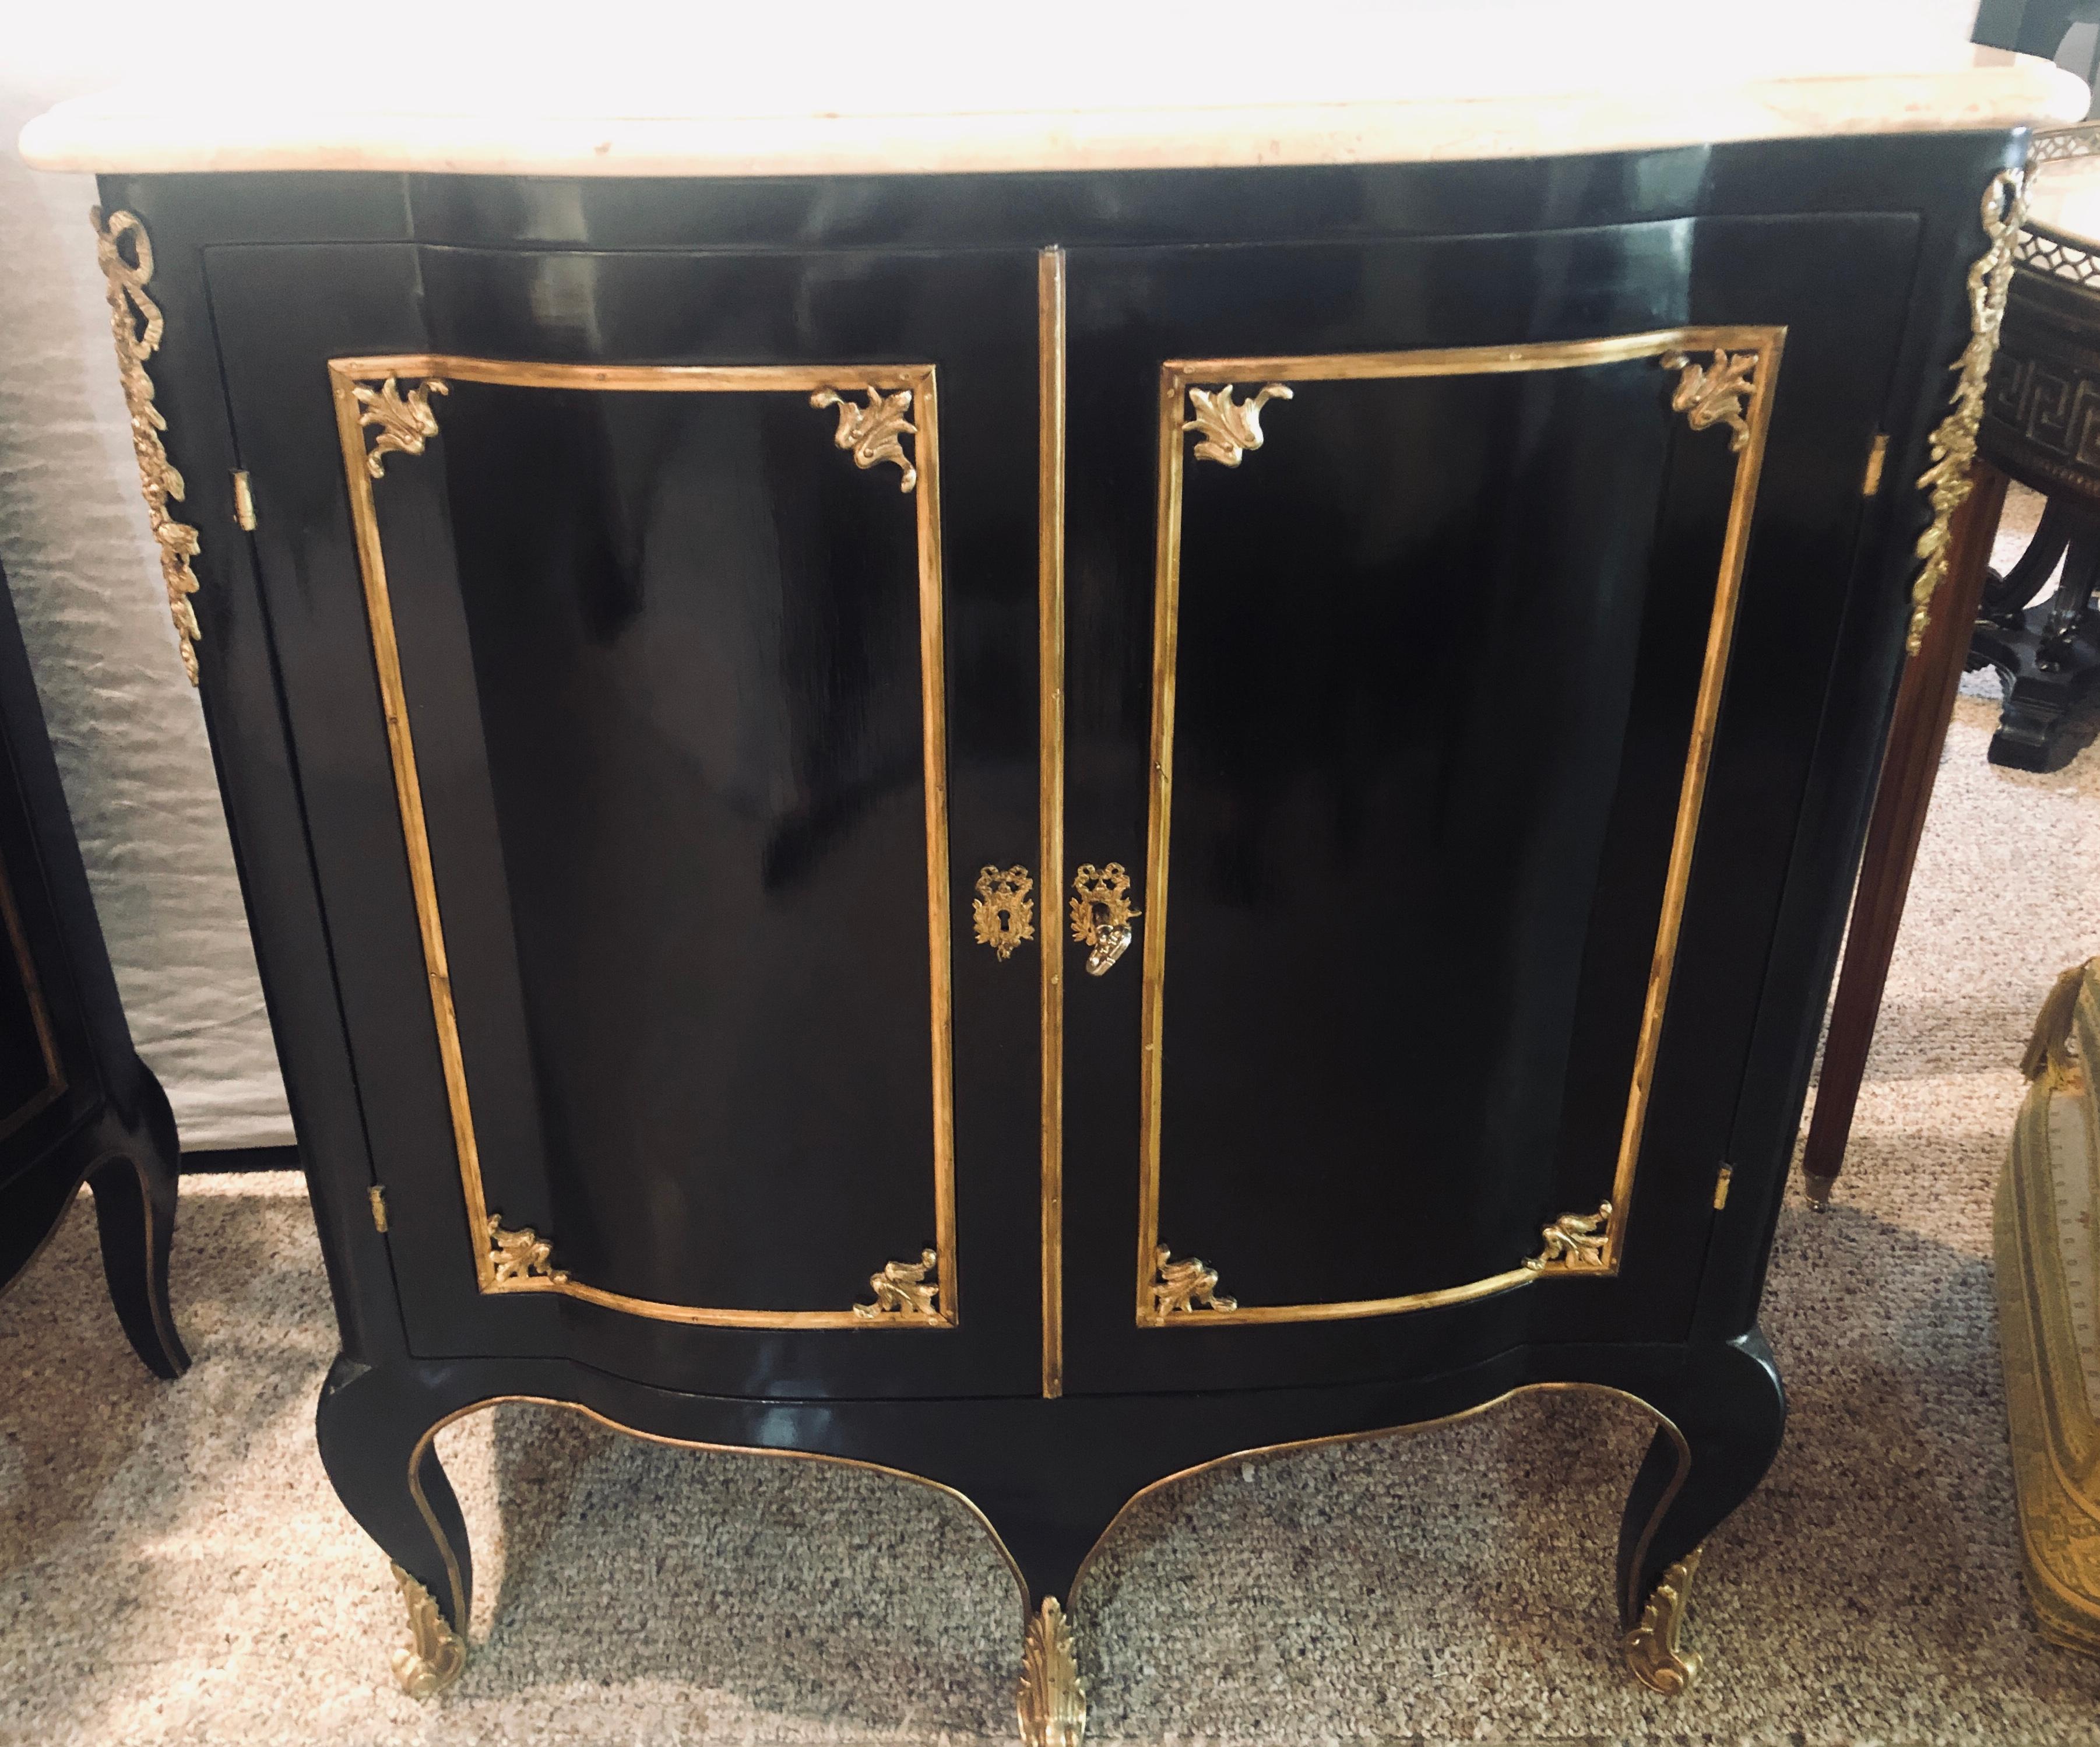 Maison Jansen Style, Hollywood Regency, Commodes, Black Lacquer, Marble, 1950s For Sale 8